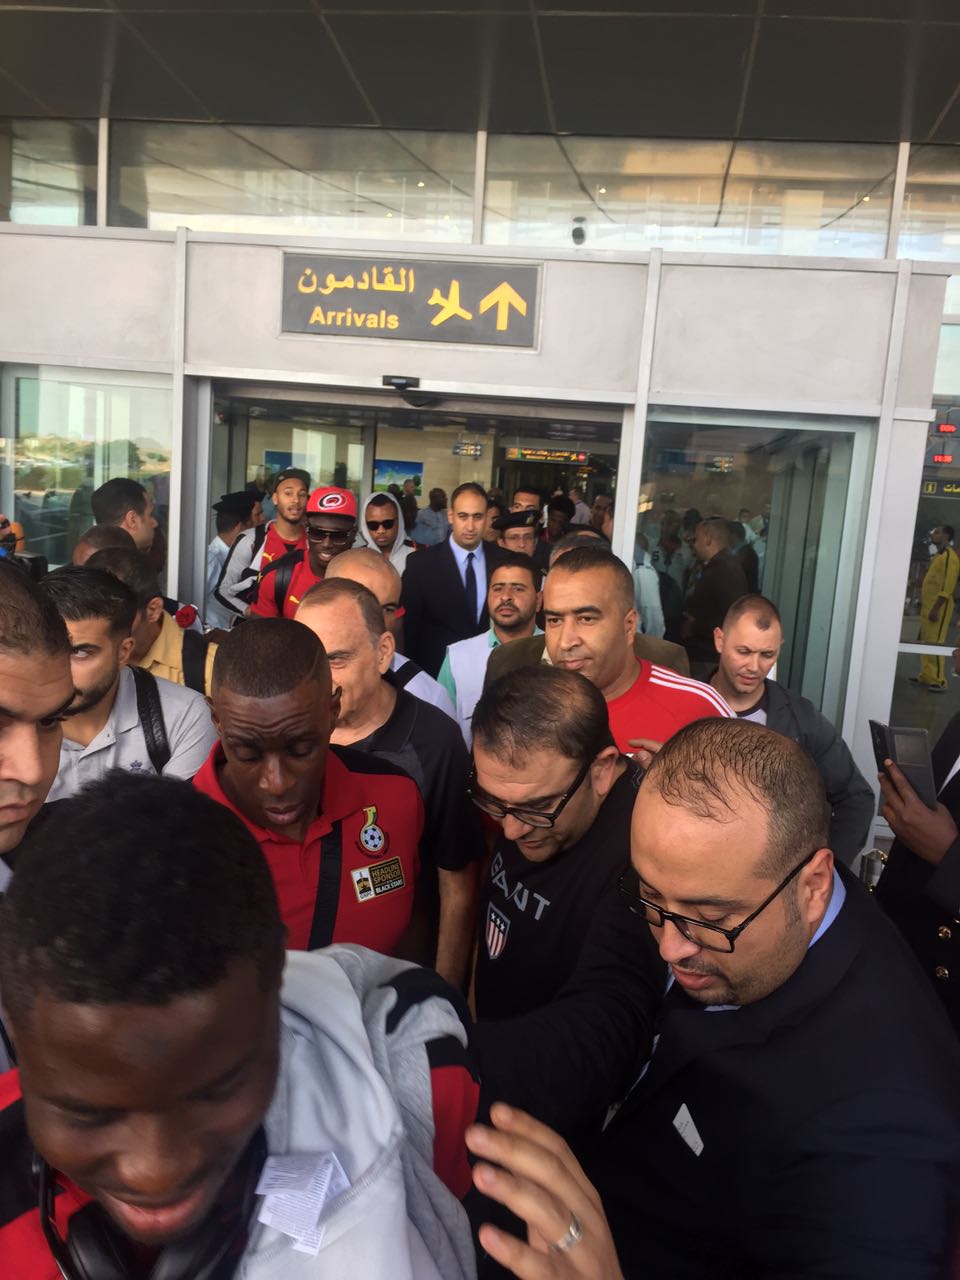 Ghana coach Avram Grant arrives in Egypt for FIFA World Qualifier with two bodyguards